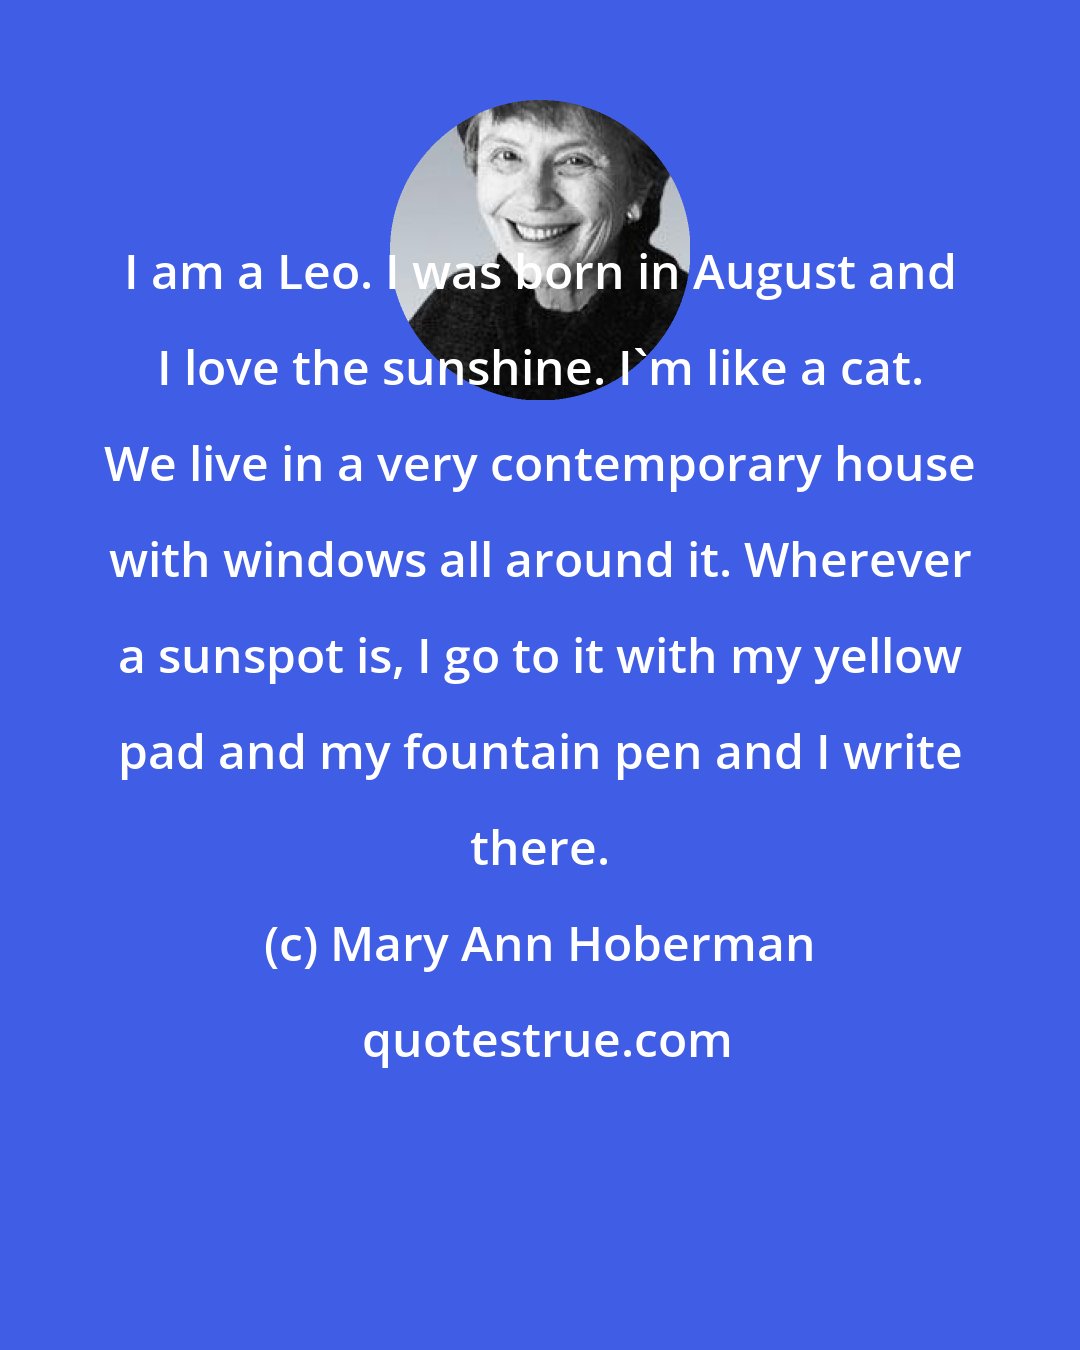 Mary Ann Hoberman: I am a Leo. I was born in August and I love the sunshine. I'm like a cat. We live in a very contemporary house with windows all around it. Wherever a sunspot is, I go to it with my yellow pad and my fountain pen and I write there.